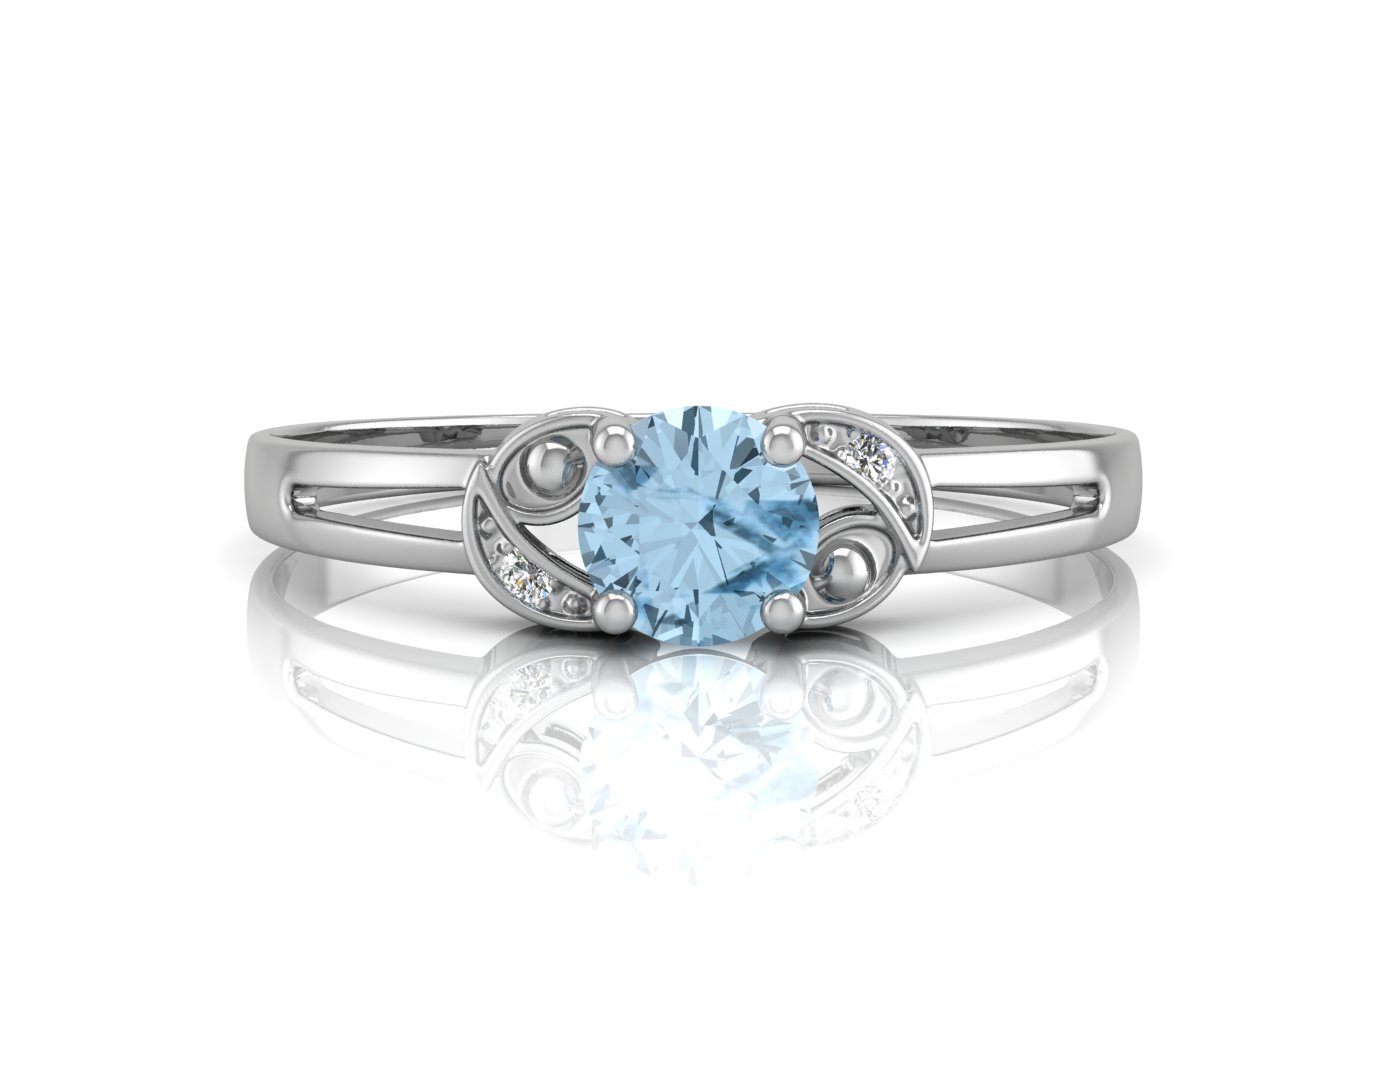 9k White Gold Fancy Cluster Diamond And Blue Topaz Ring 0.01 Carats - Image 4 of 4